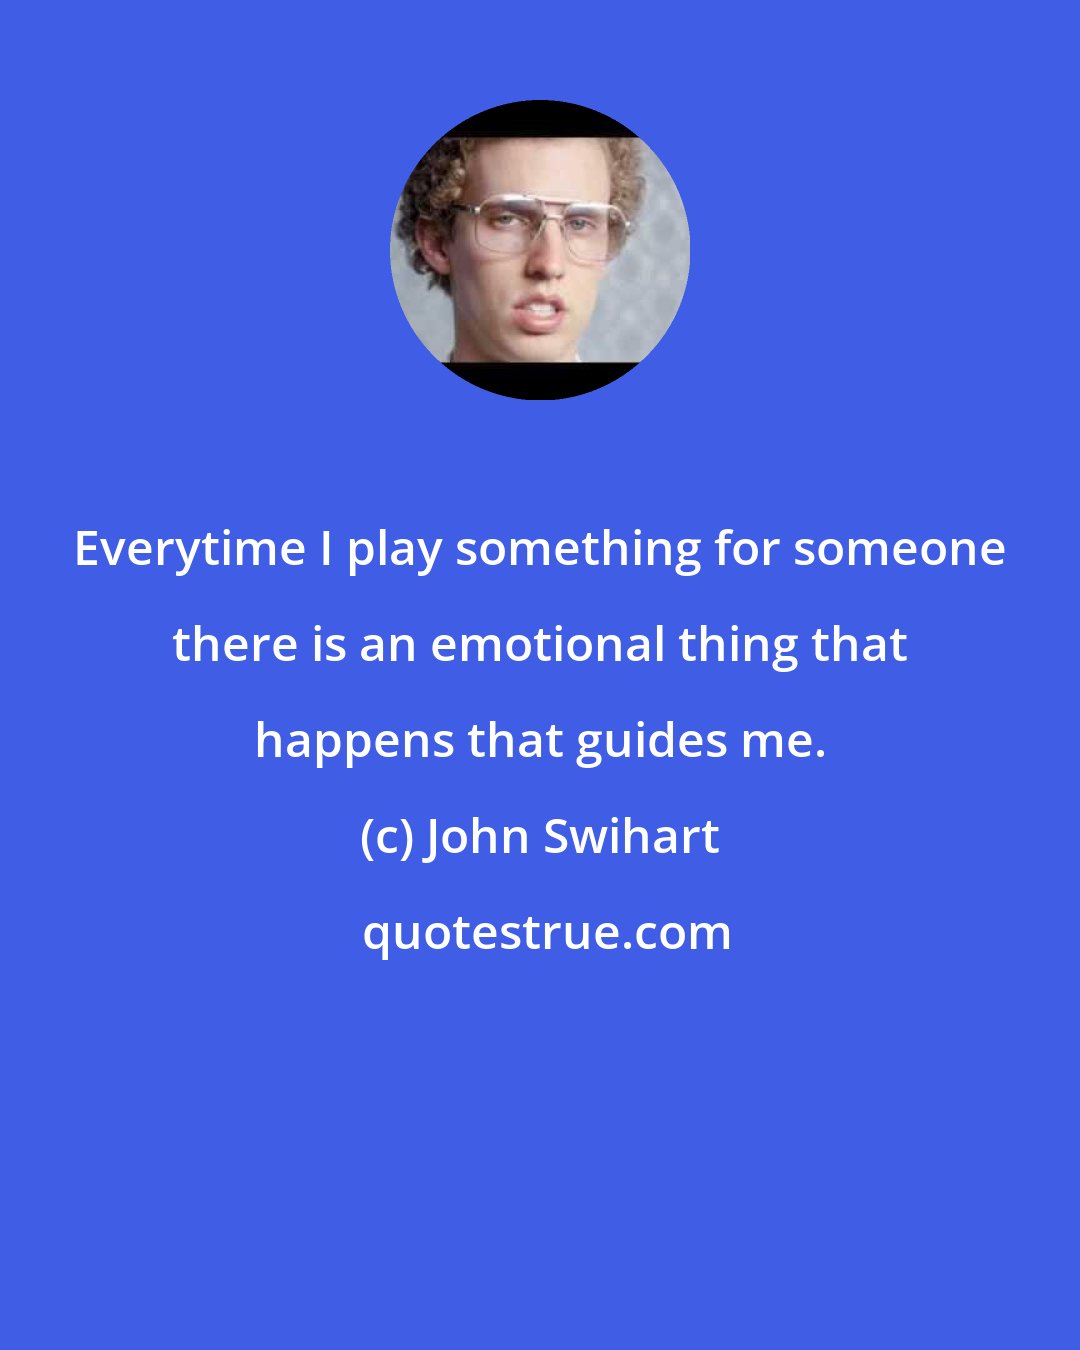 John Swihart: Everytime I play something for someone there is an emotional thing that happens that guides me.